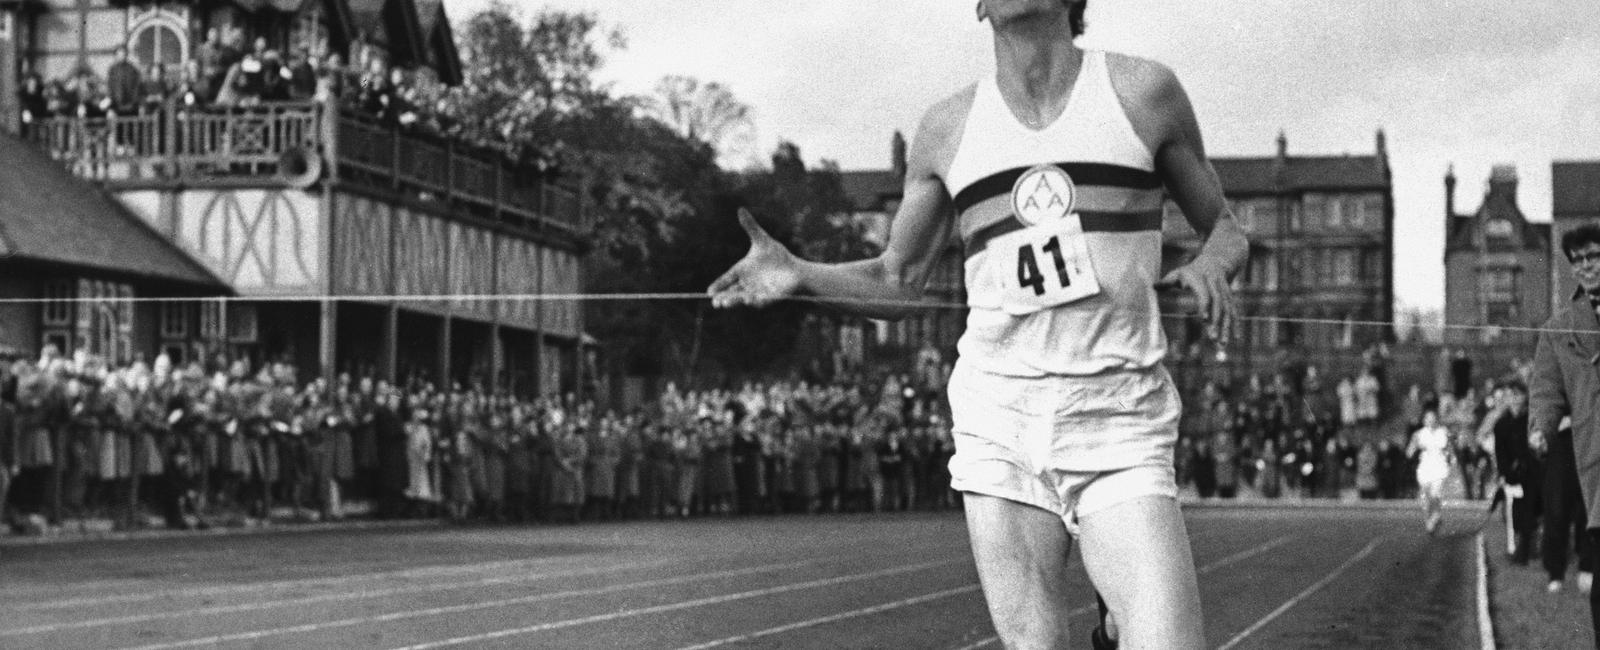 Roger bannister held the world record in the mile for exactly 46 days